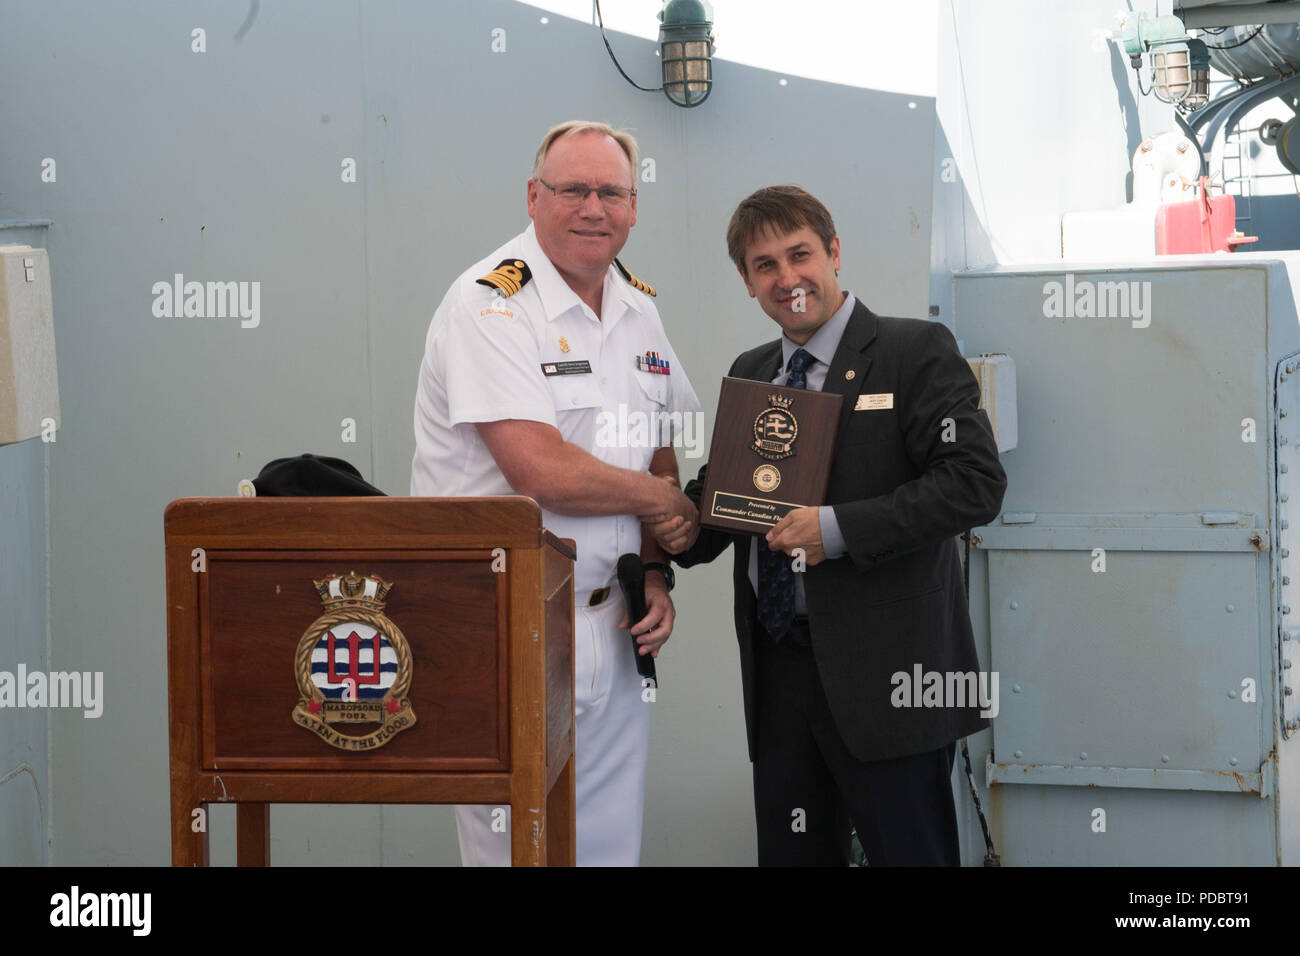 180804-N-DA737-0069 SEATTLE (August 4, 2018) Capt. Steve Jorgensen, deputy commander of Canadian Fleet Pacific, presents a plaque to Seattle Navy League President Jeff Davis during a reception held aboard Kingston-class coastal defense vessels HMCS Whitehorse (710) and HMCS Yellowknife (706) during Seattle’s Seafair Fleet Week. Seafair Fleet Week is an annual celebration of the sea services wherein Sailors, Marines and Coast Guard members from visiting U.S. Navy and Coast Guard ships and ships from Canada make the city a port of call. (U.S. Navy photo by Mass Communication Specialist 2nd Class Stock Photo